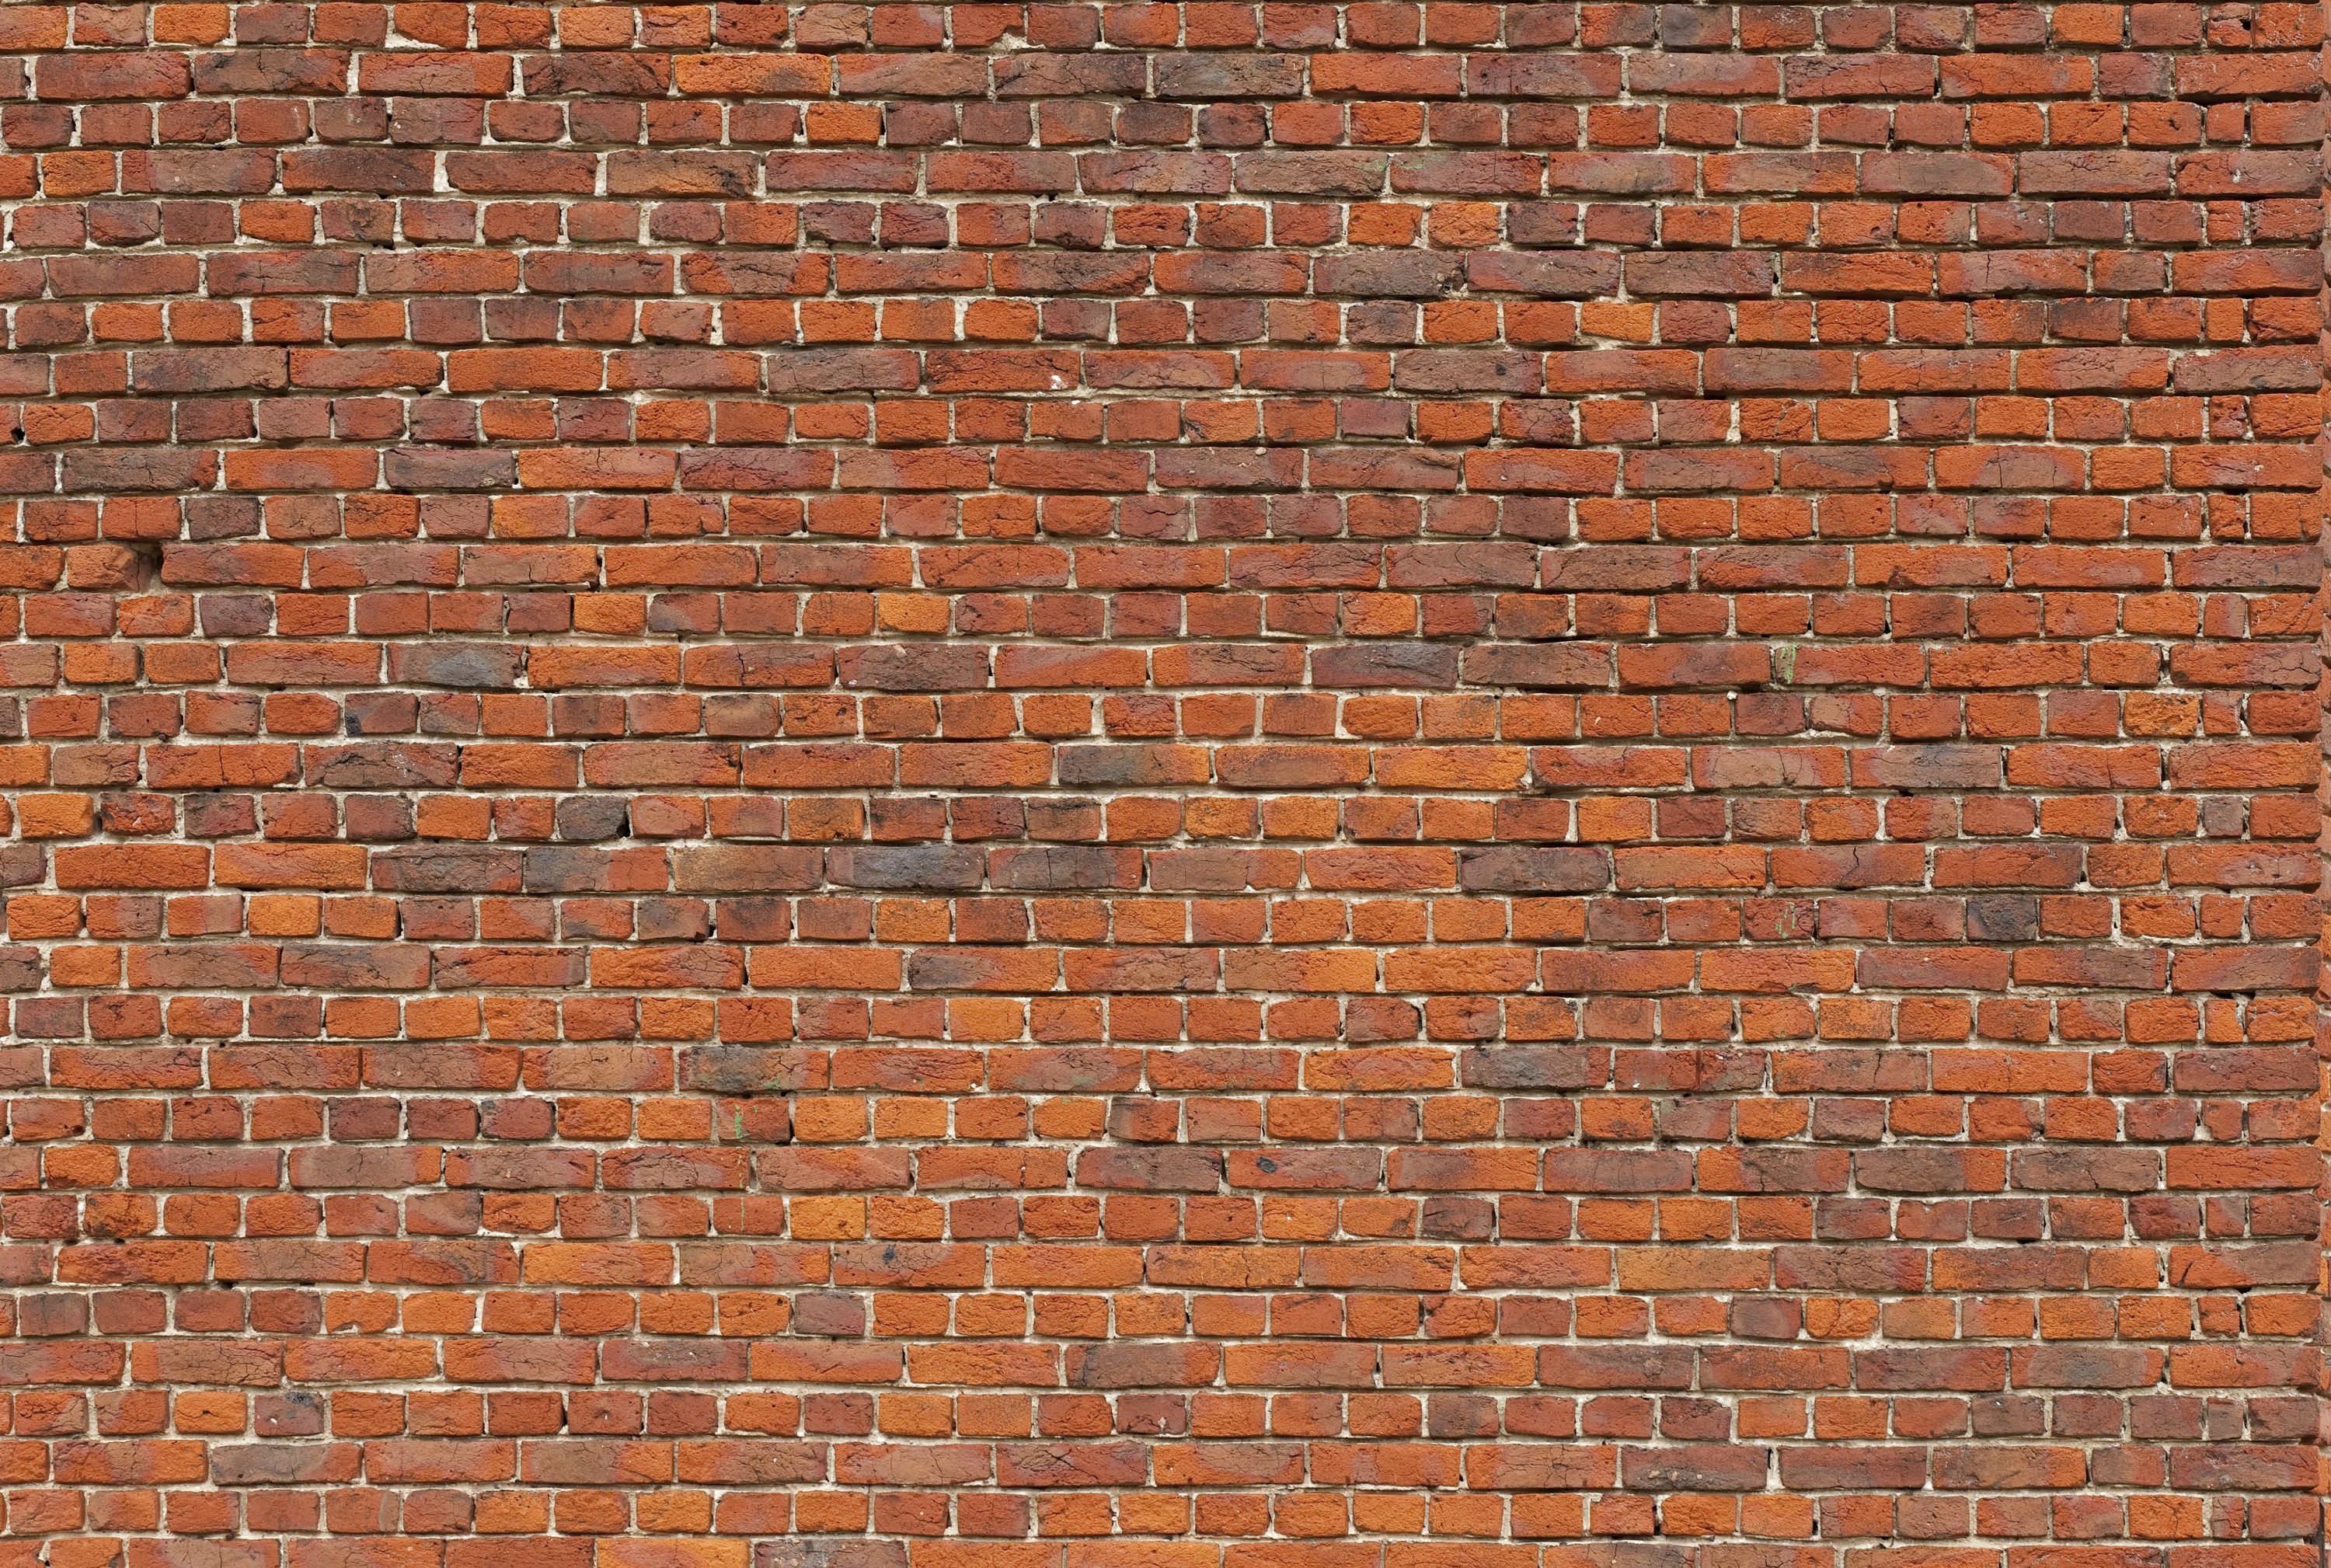 Brick Backgrounds Group (56+)